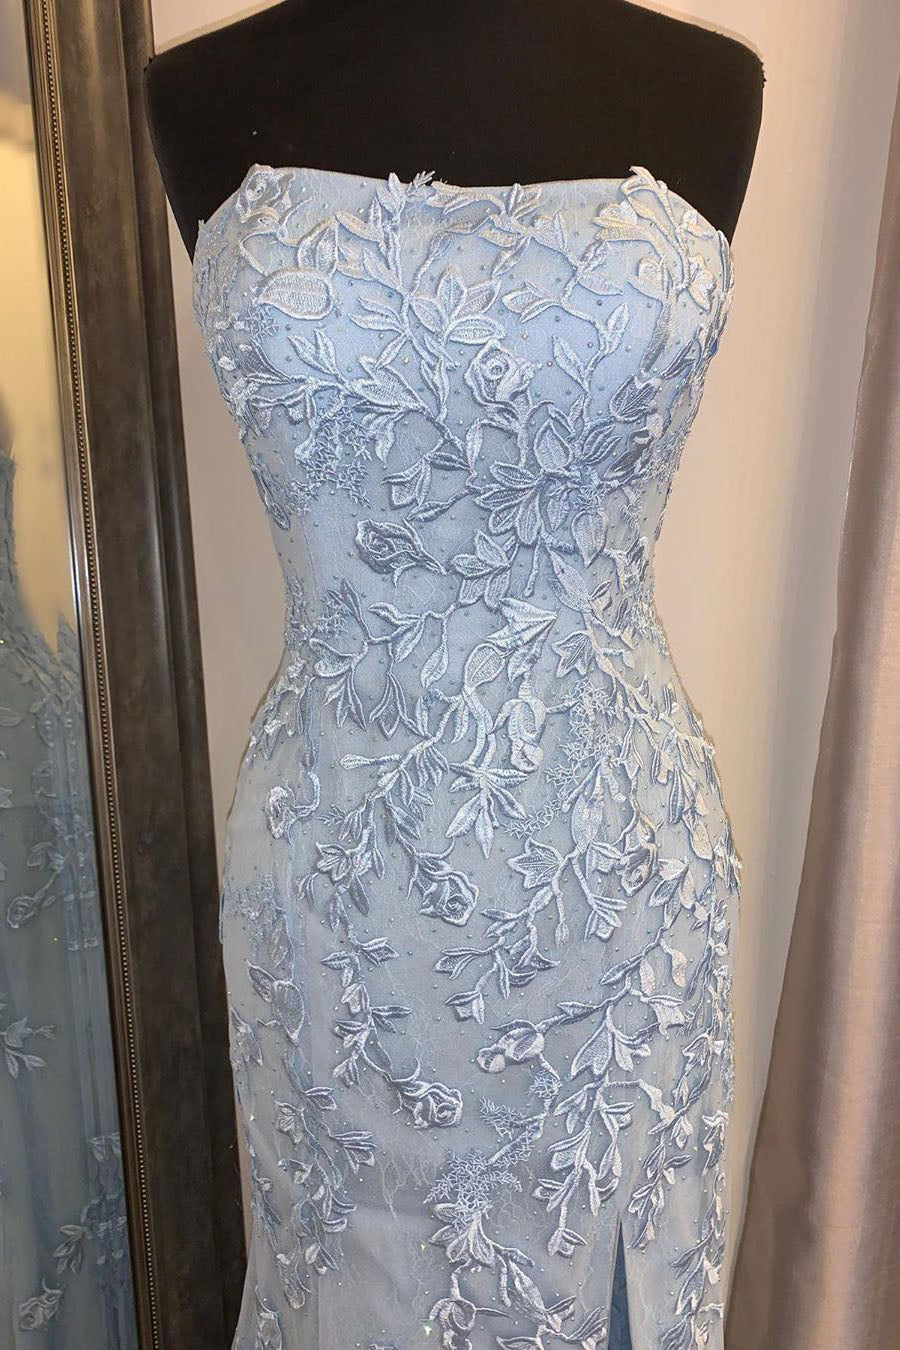 Homecomming Dresses Lace, Elegant Strapless Mermaid Sky Blue Long Lace Prom Dress with Slit